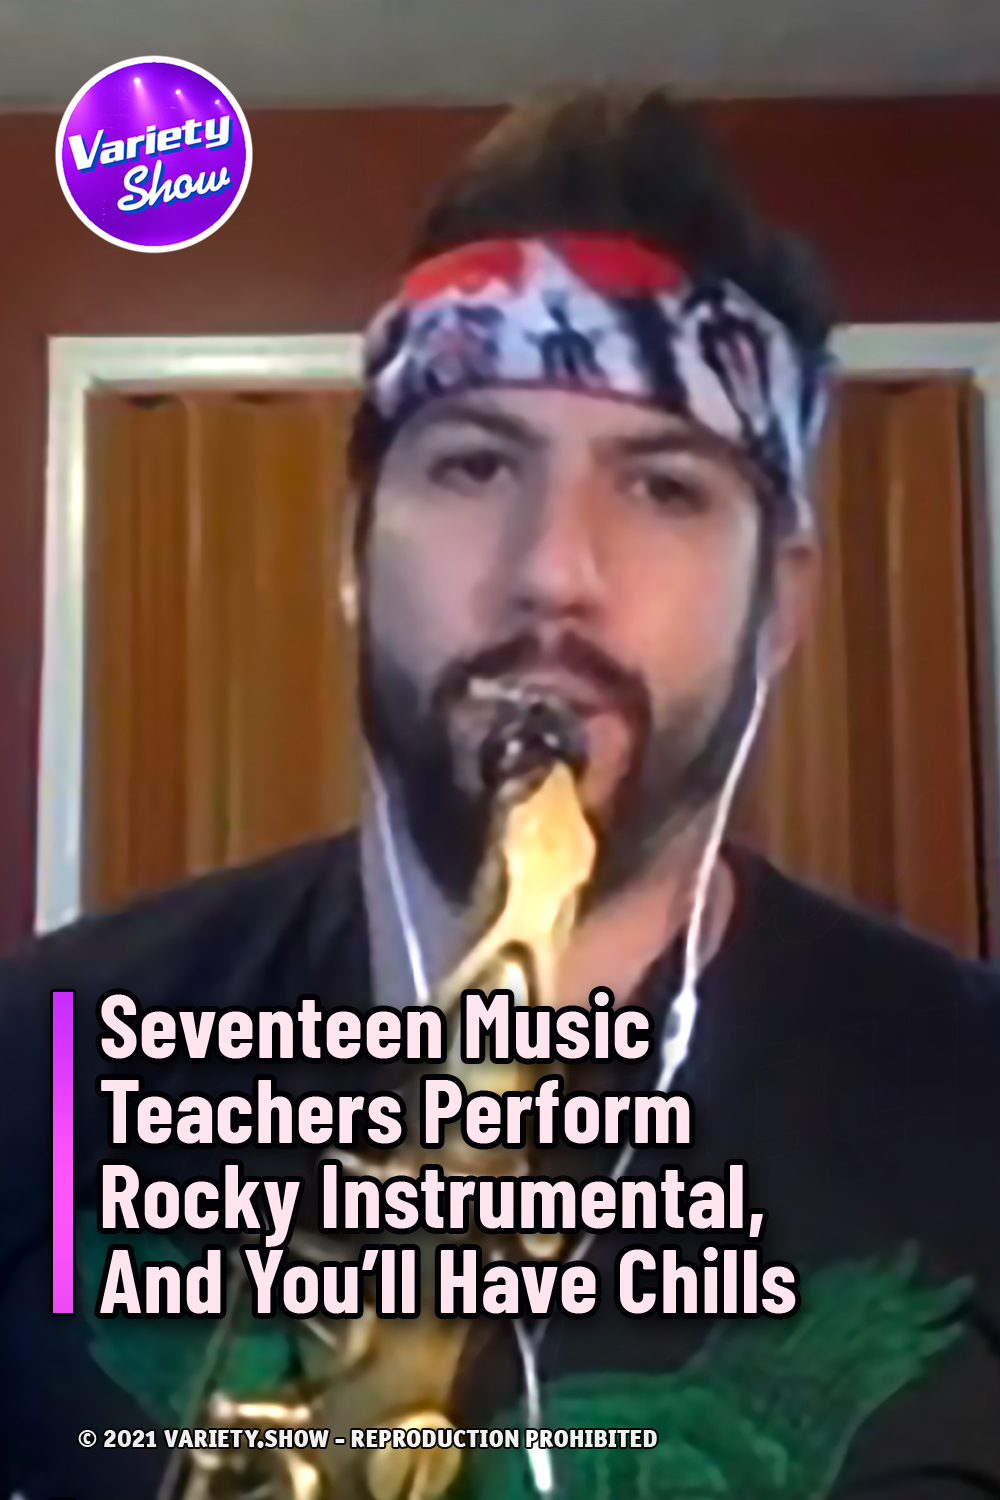 Seventeen Music Teachers Perform Rocky Instrumental, And You’ll Have Chills